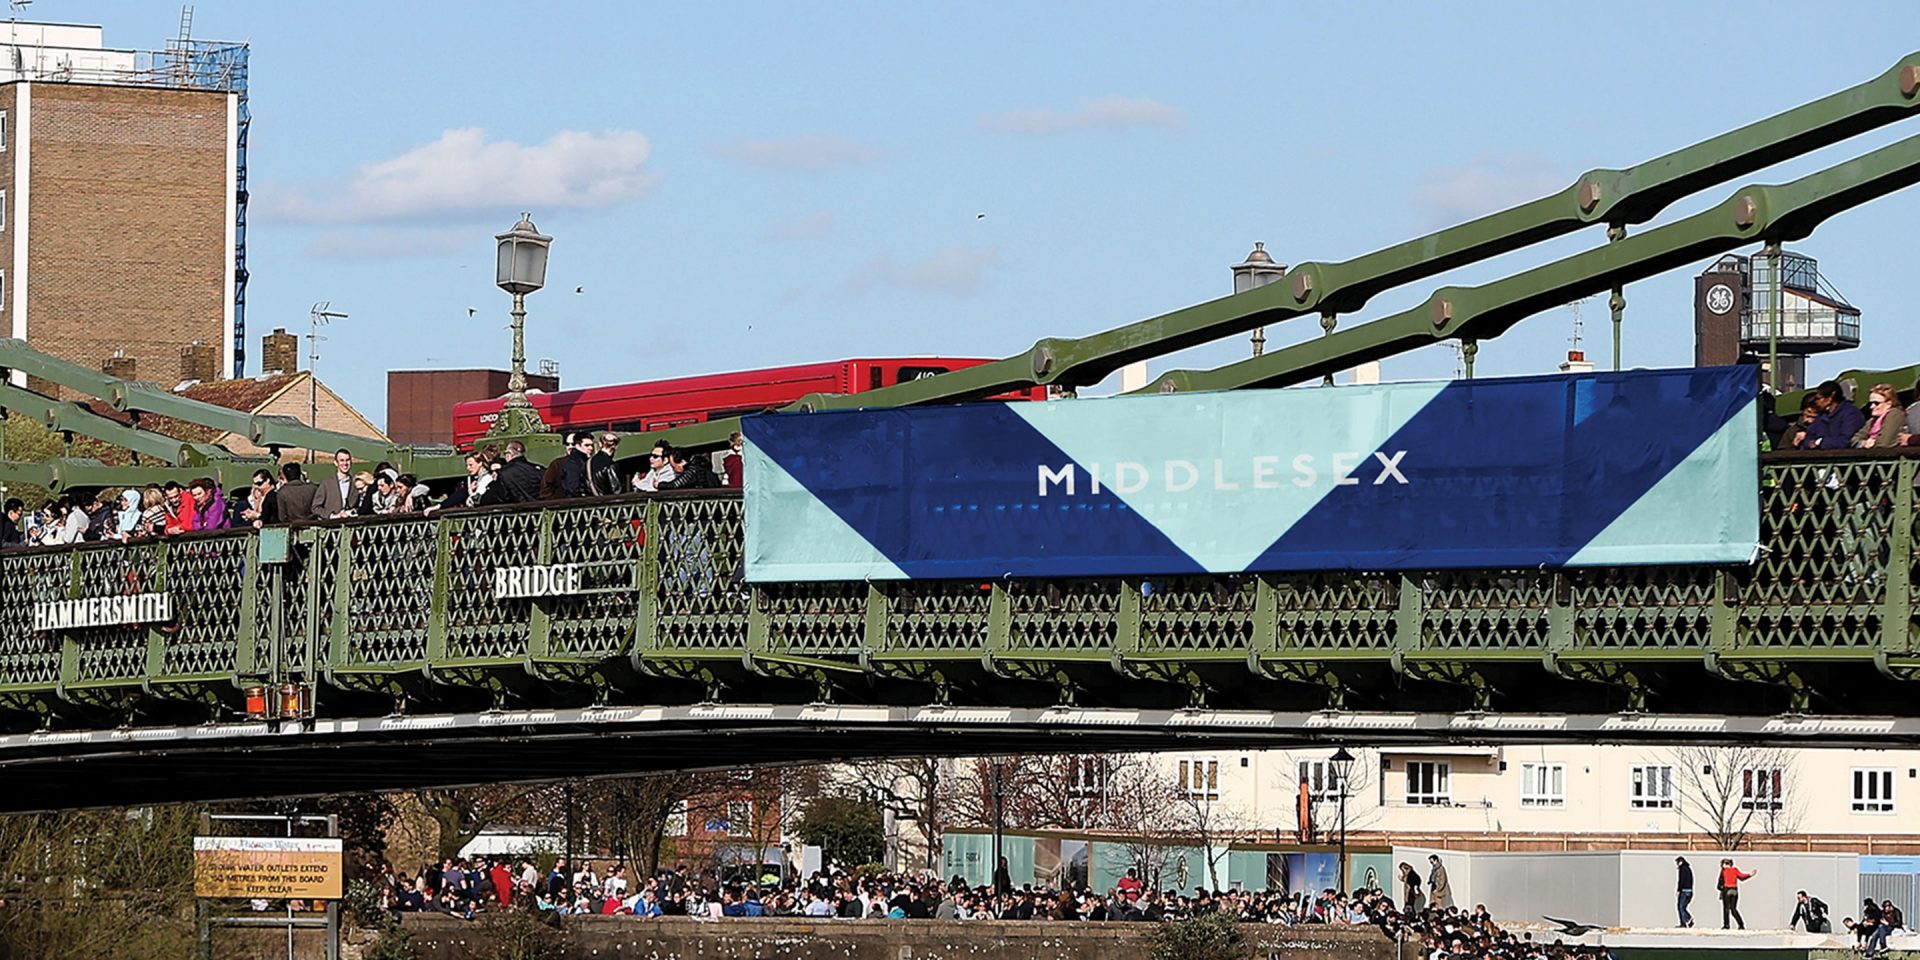 The Boat Race Signage & Material